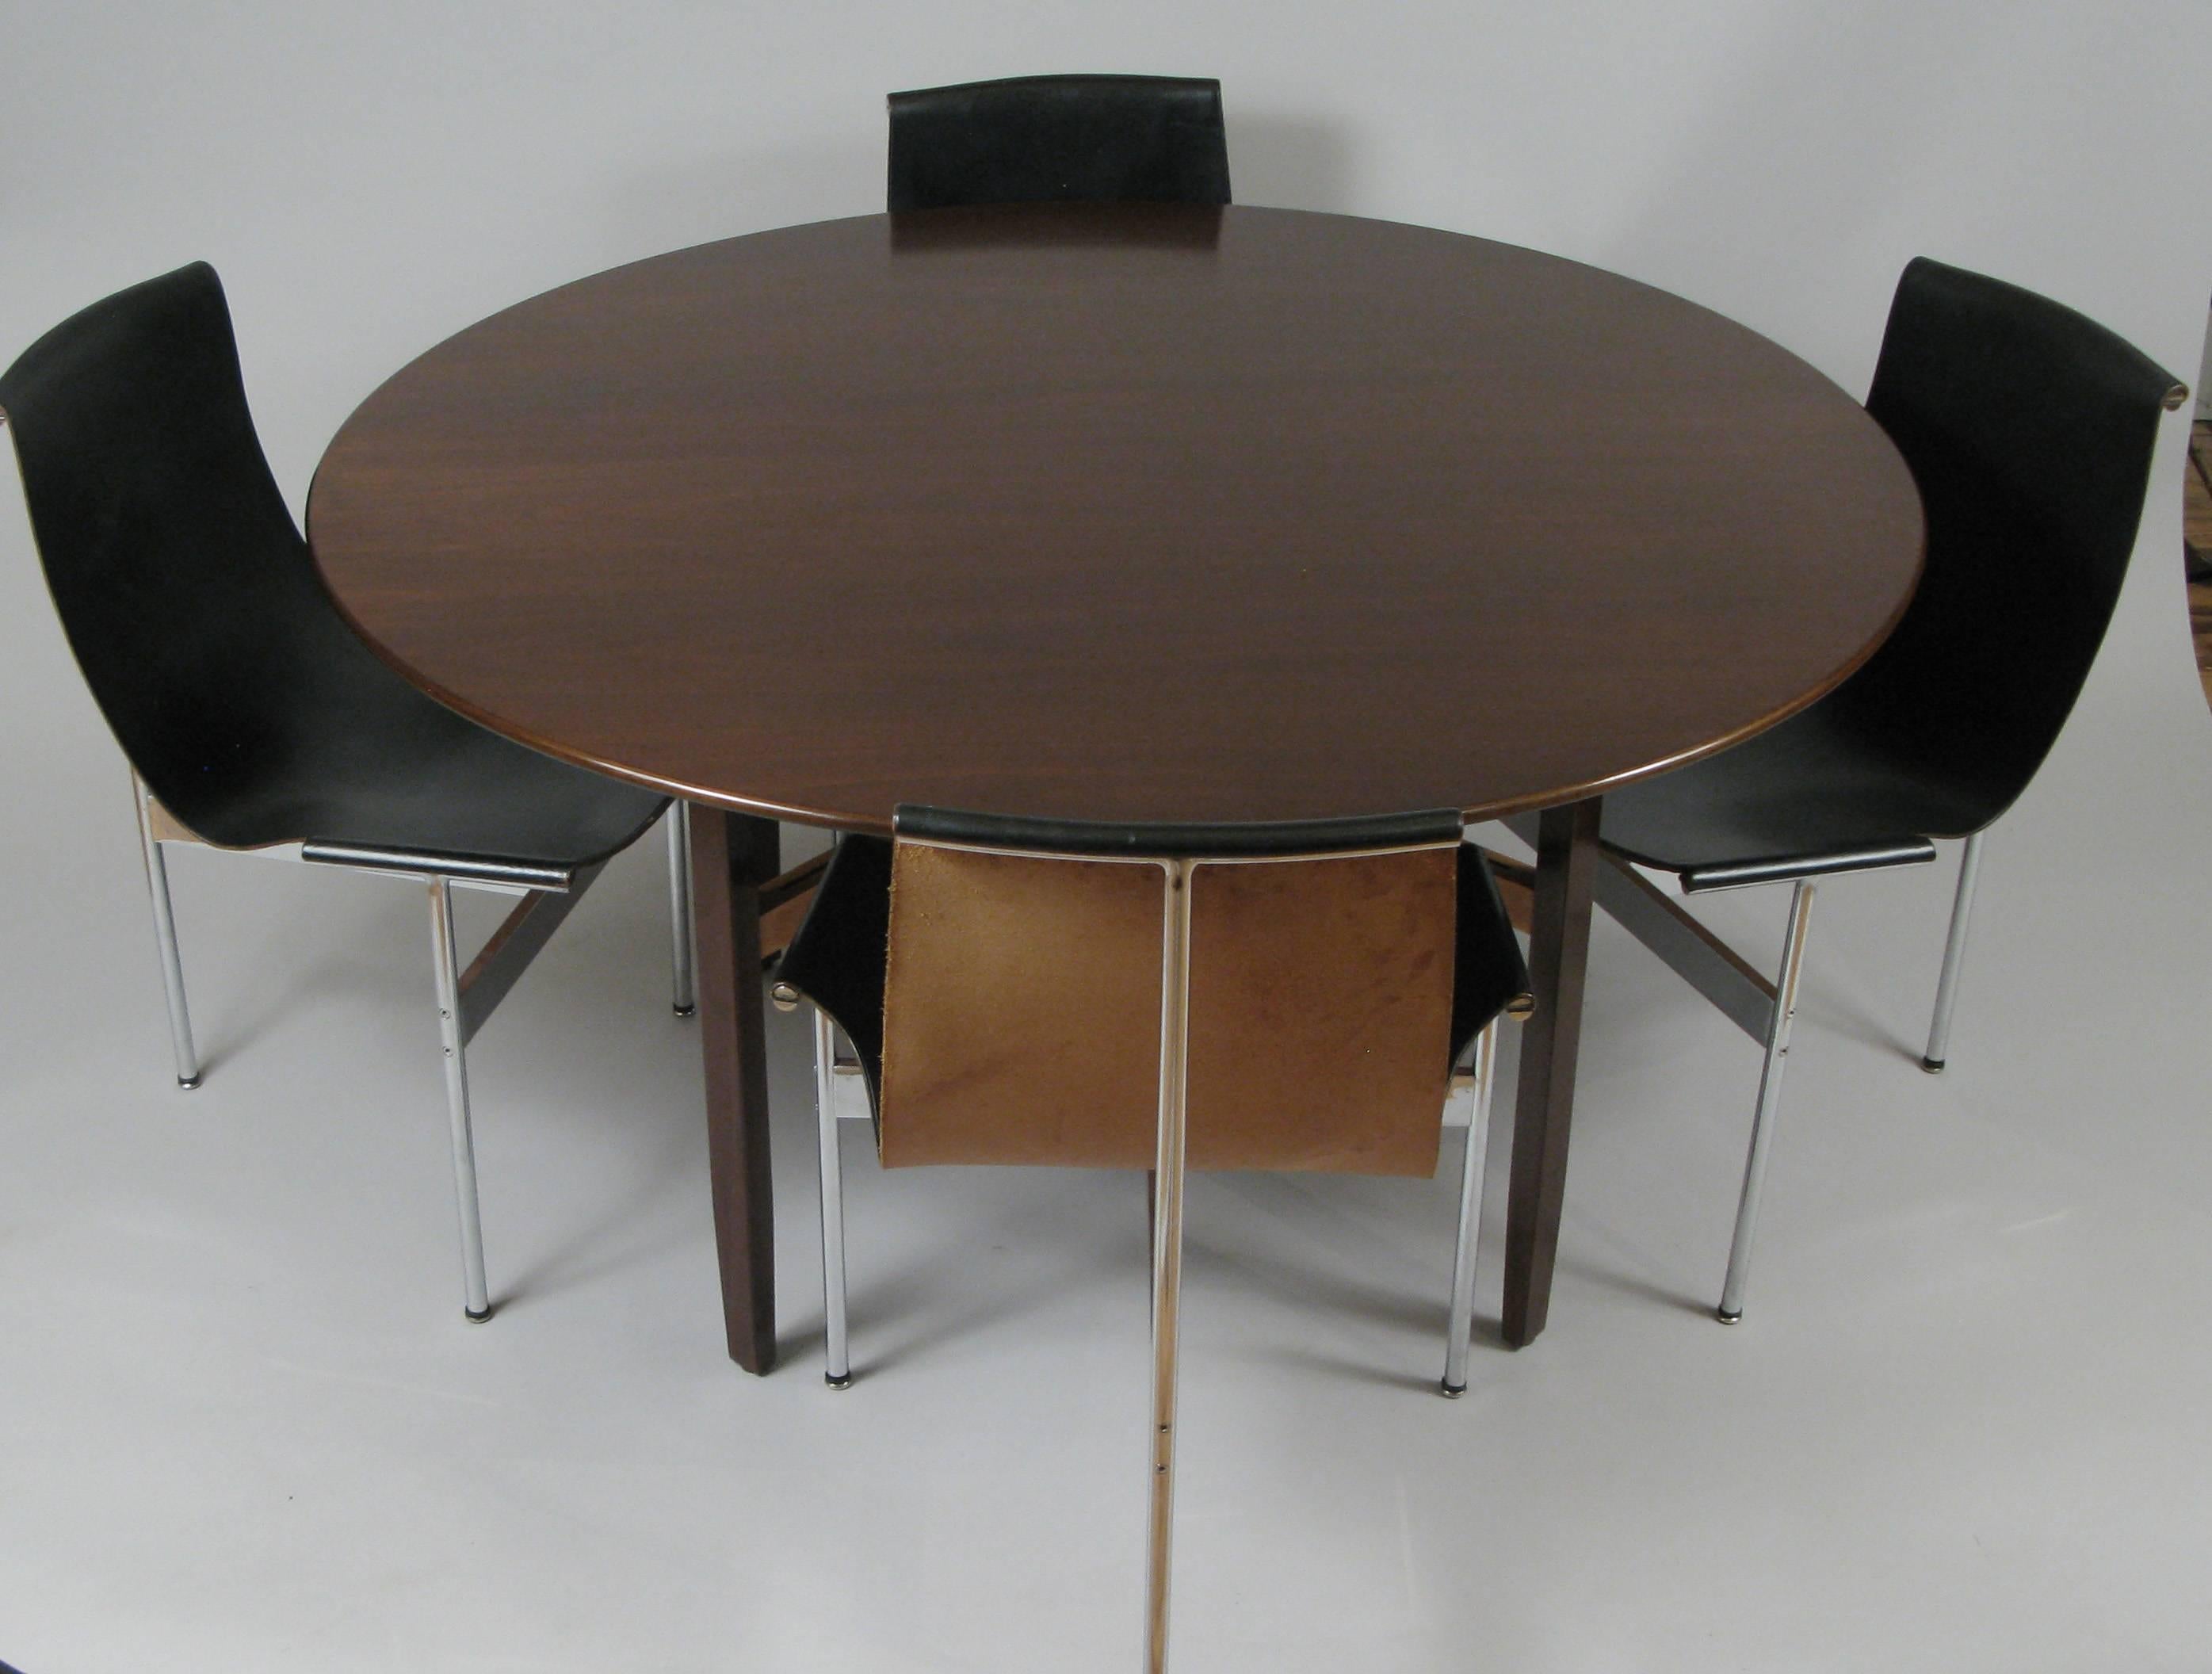 American Walnut and Birch Dining Table by Lewis Butler for Knoll